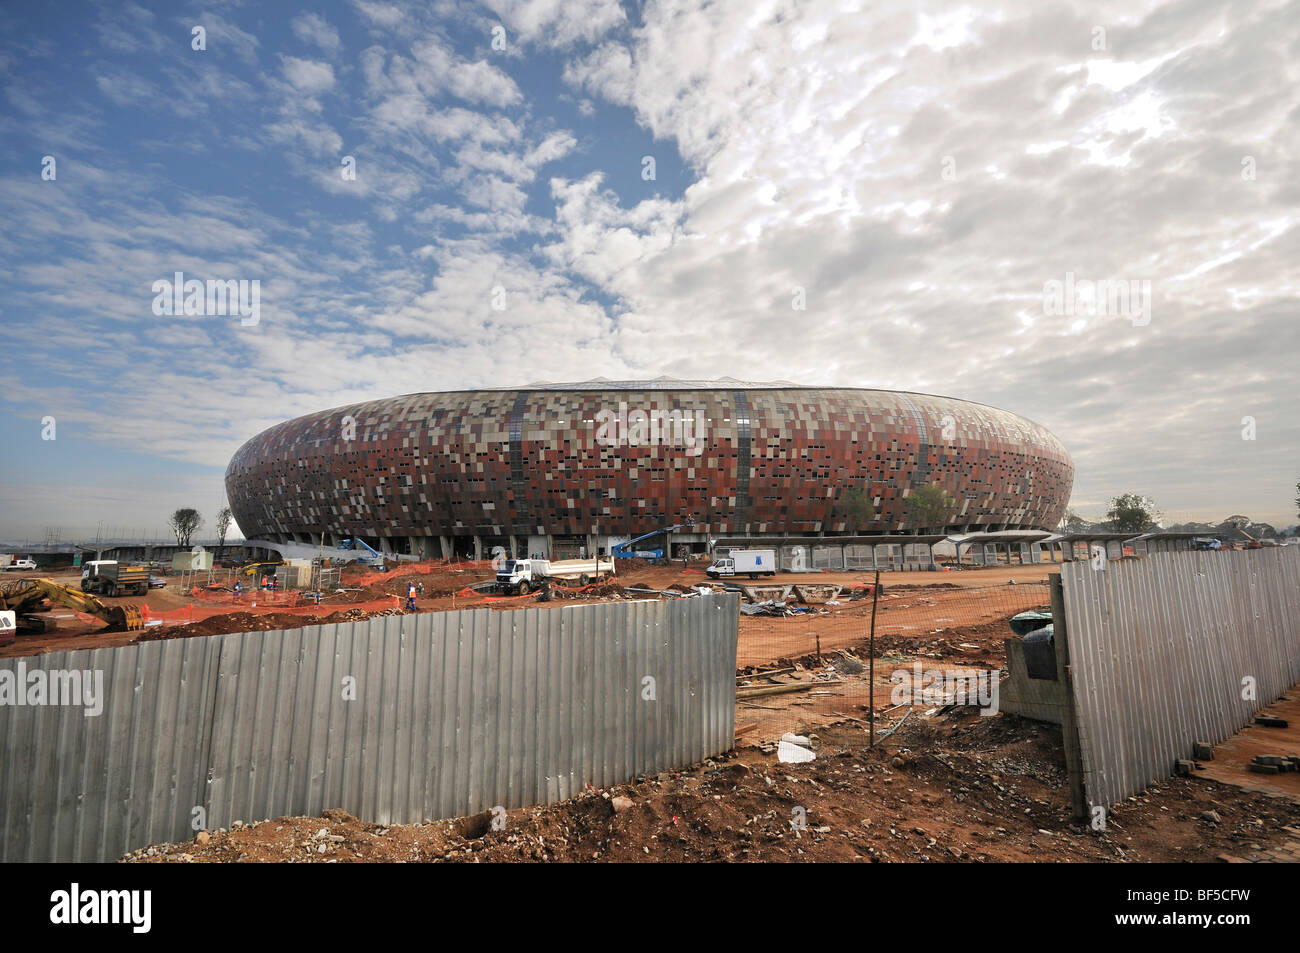 FIFA World Cup 2010, construction site of the Soccer City Stadium in the Soweto district, Johannesburg, South Africa, Africa Stock Photo